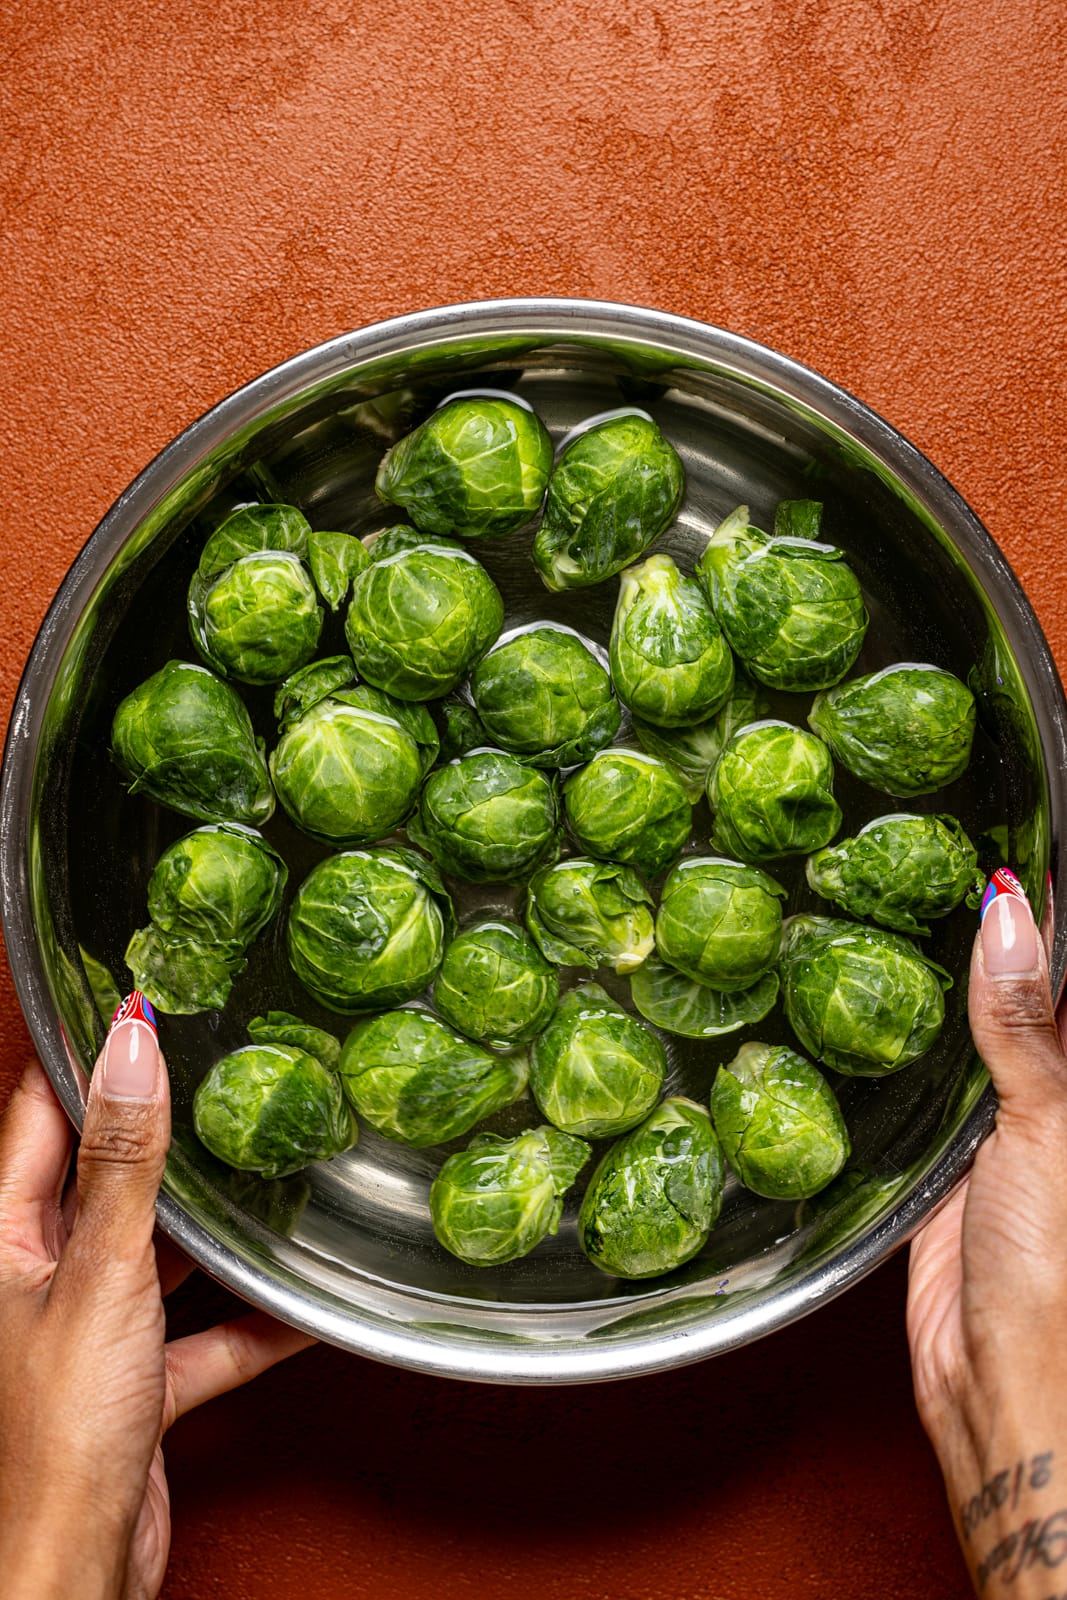 Soaked Brussels sprouts being held in a bowl.